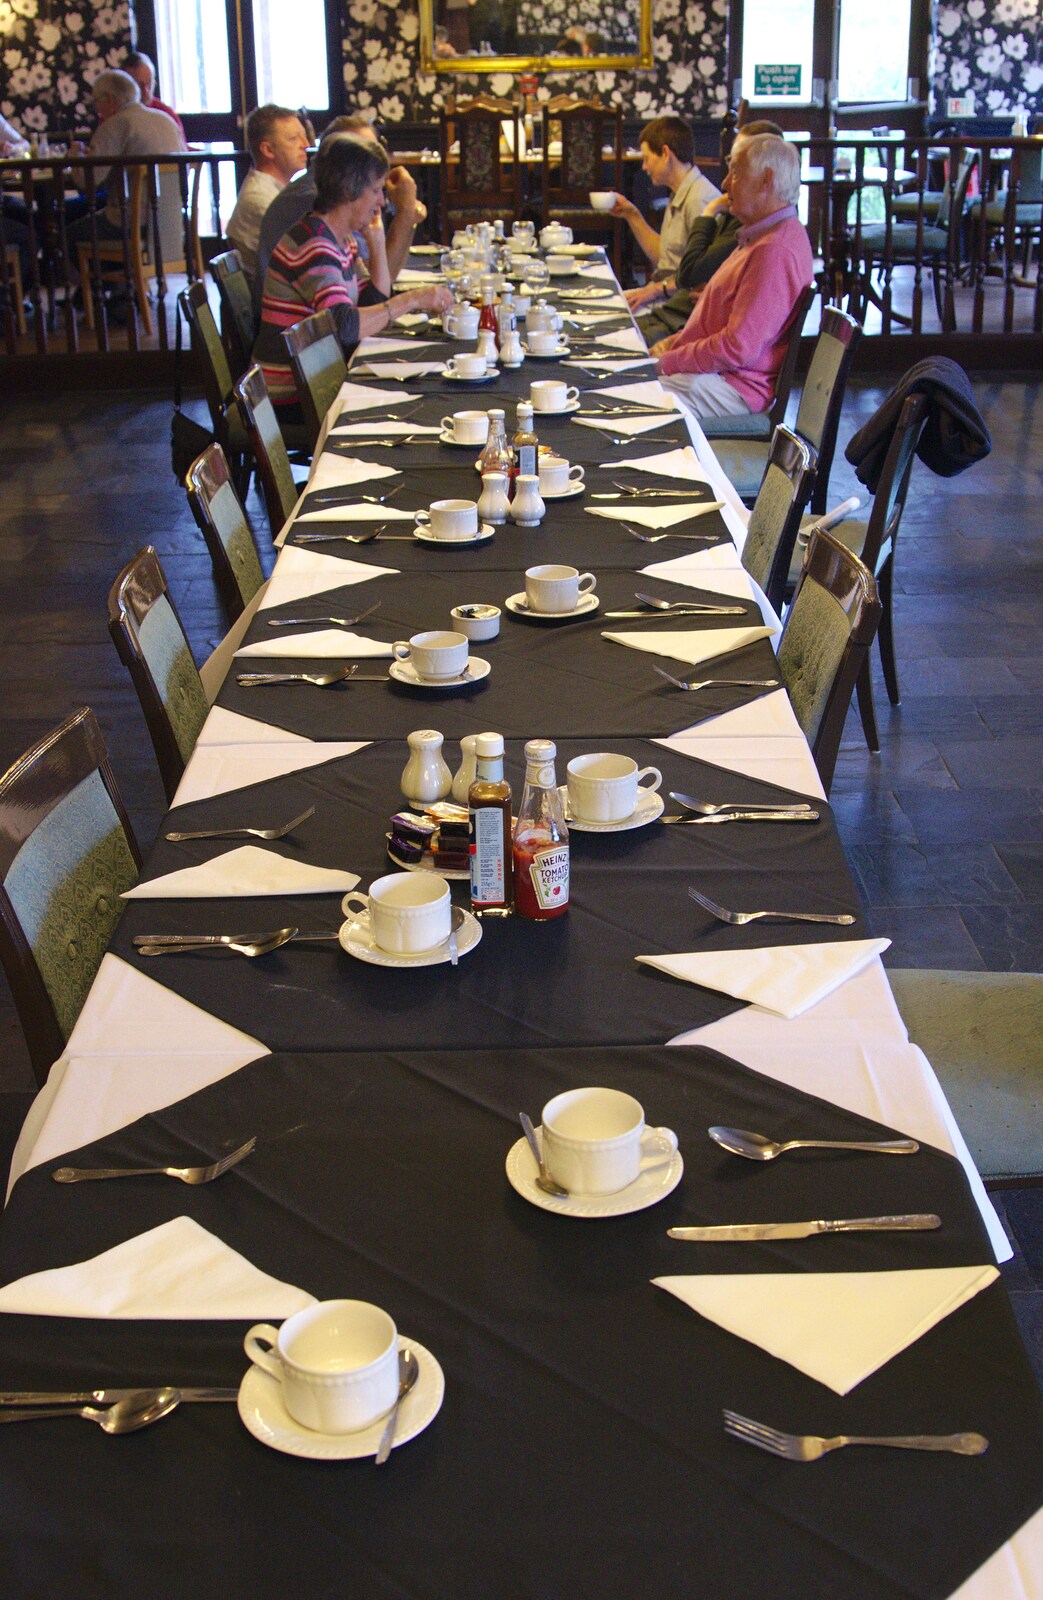 On the last morning, our breakfast table is laid out from A Return to Bedford: the BSCC Annual Weekend Away, Shefford, Bedfordshire - 10th May 2014